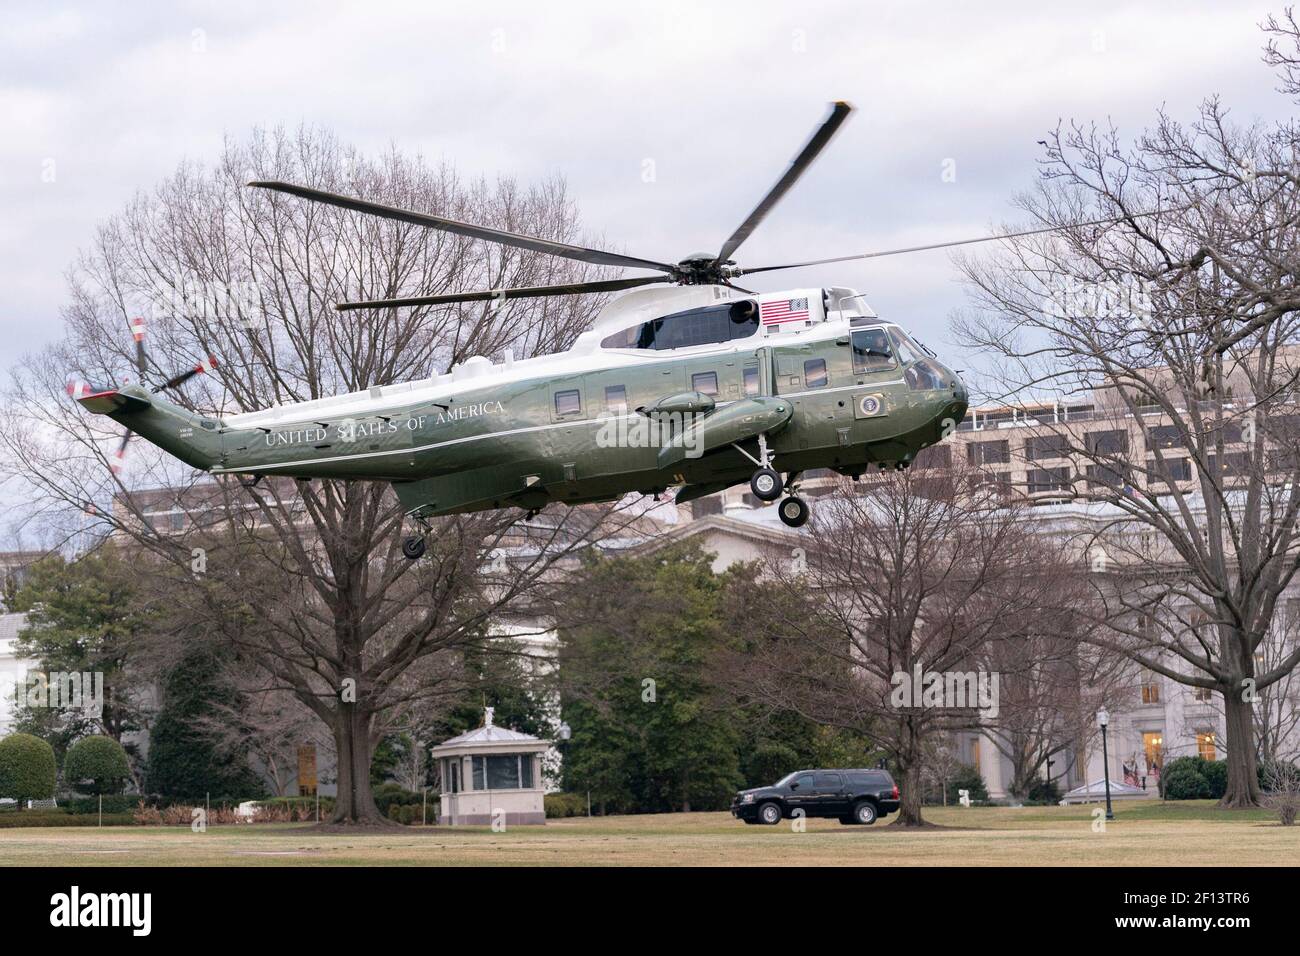 Marine One carrying President Donald Trump lifts-off from the South Lawn of the White House Tuesday Jan. 28 2020 on his way to Joint Base Andrews Md. to begin his trip to attend a rally in Wildwood N.J. Stock Photo